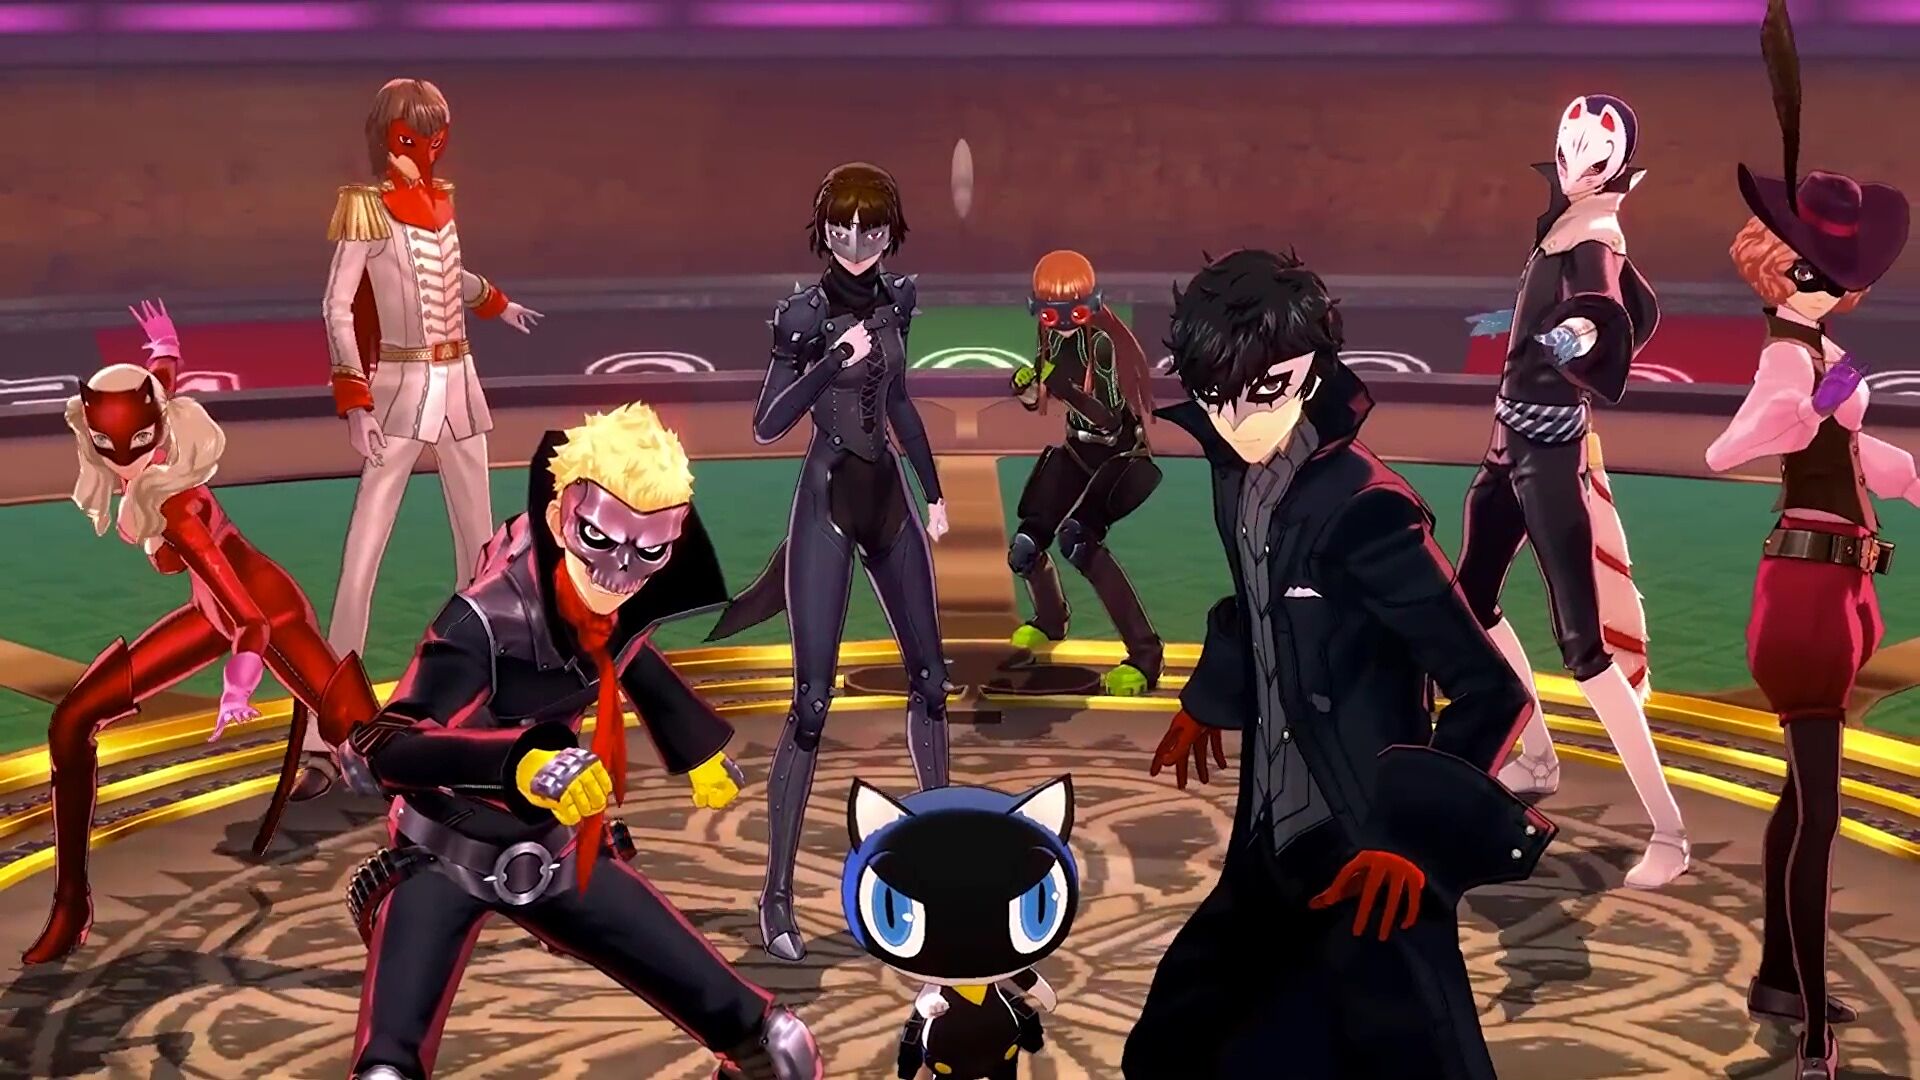 Persona 5 Royal finally hits PC this week and here’s why it’s still the JRPG king